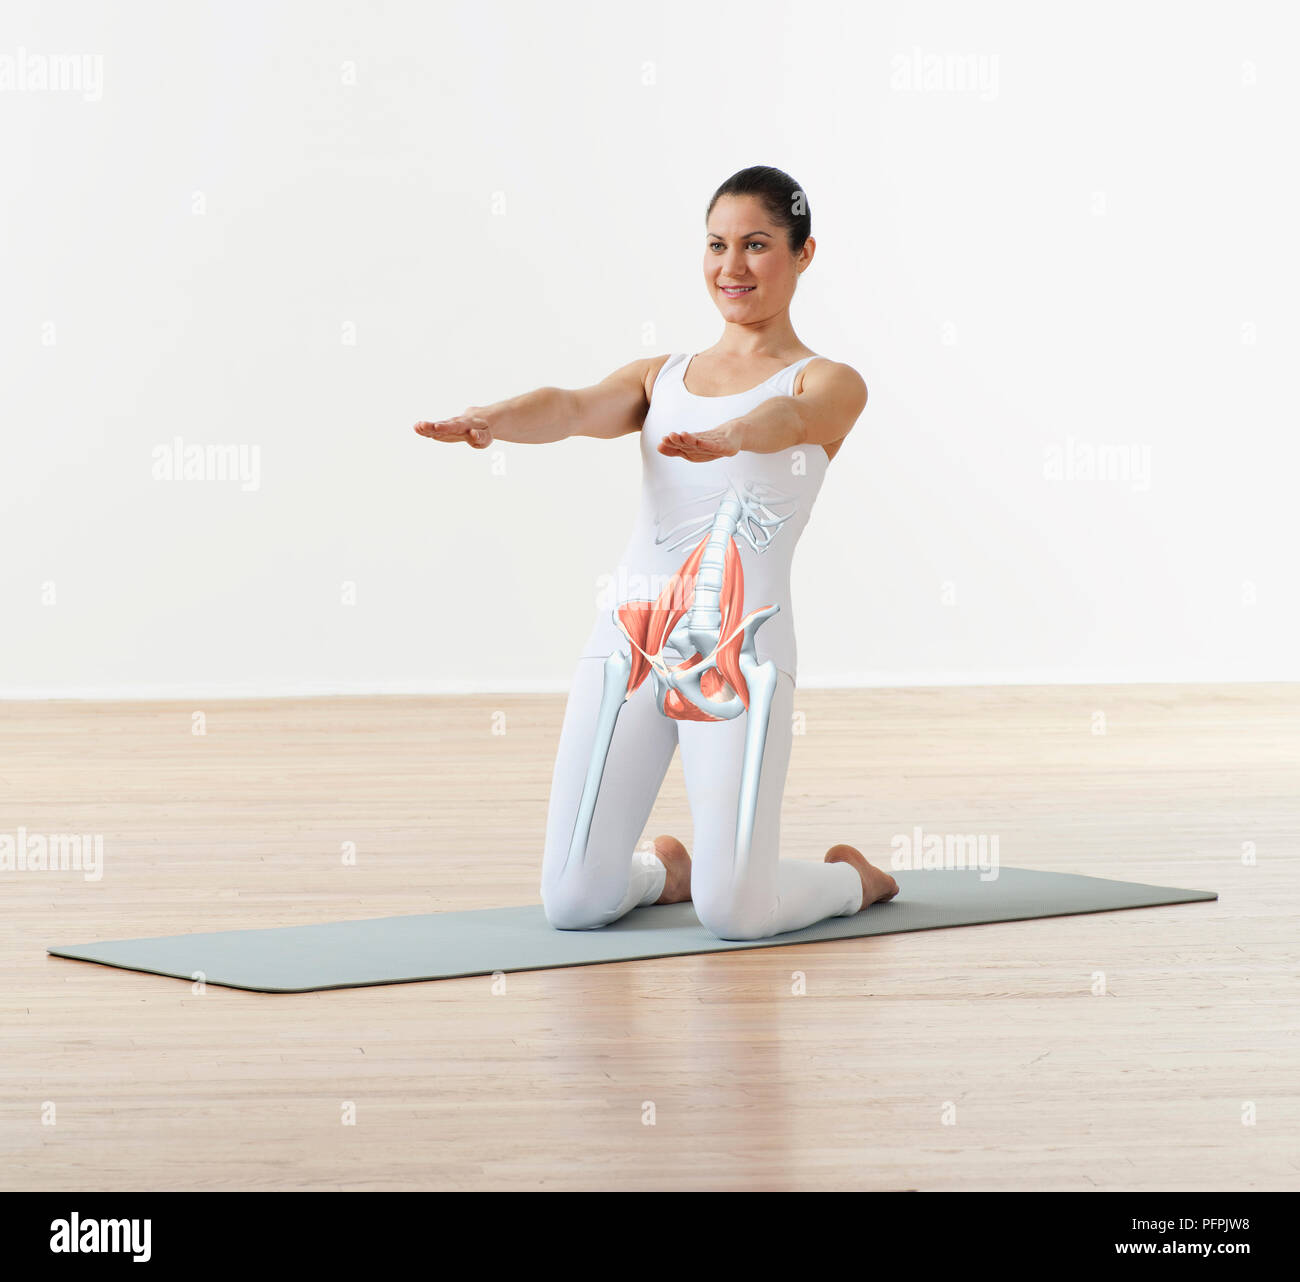 Spine and lower body organs superimposed on body of woman doing stretching exercise, kneeling and leaning back, arms out in front of her Stock Photo